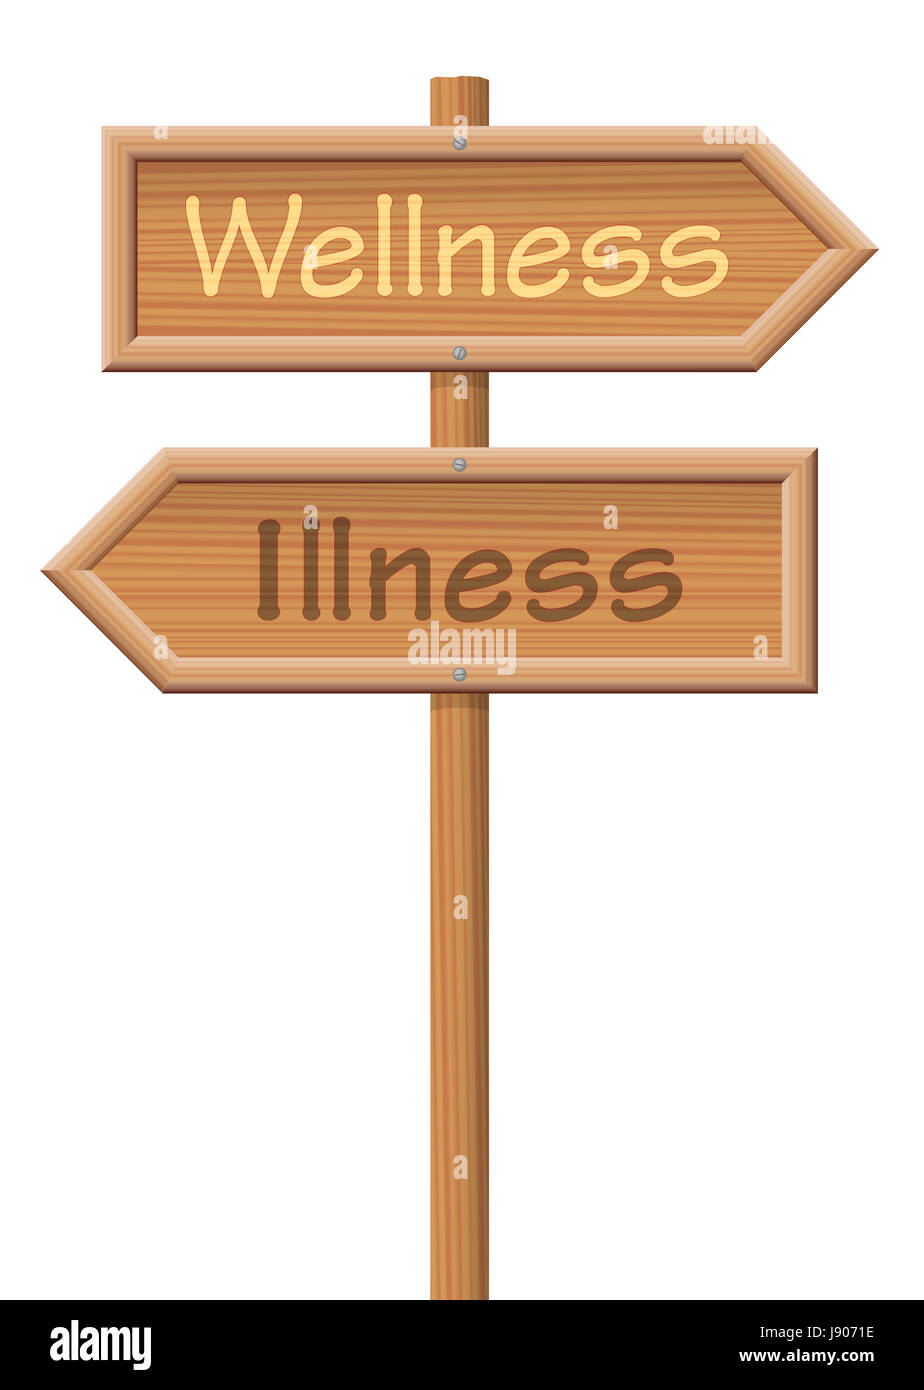 Wellness and Illness, written on wooden signposts in opposite directions, as a symbol for the two options health or disease. Illustration. Stock Photo